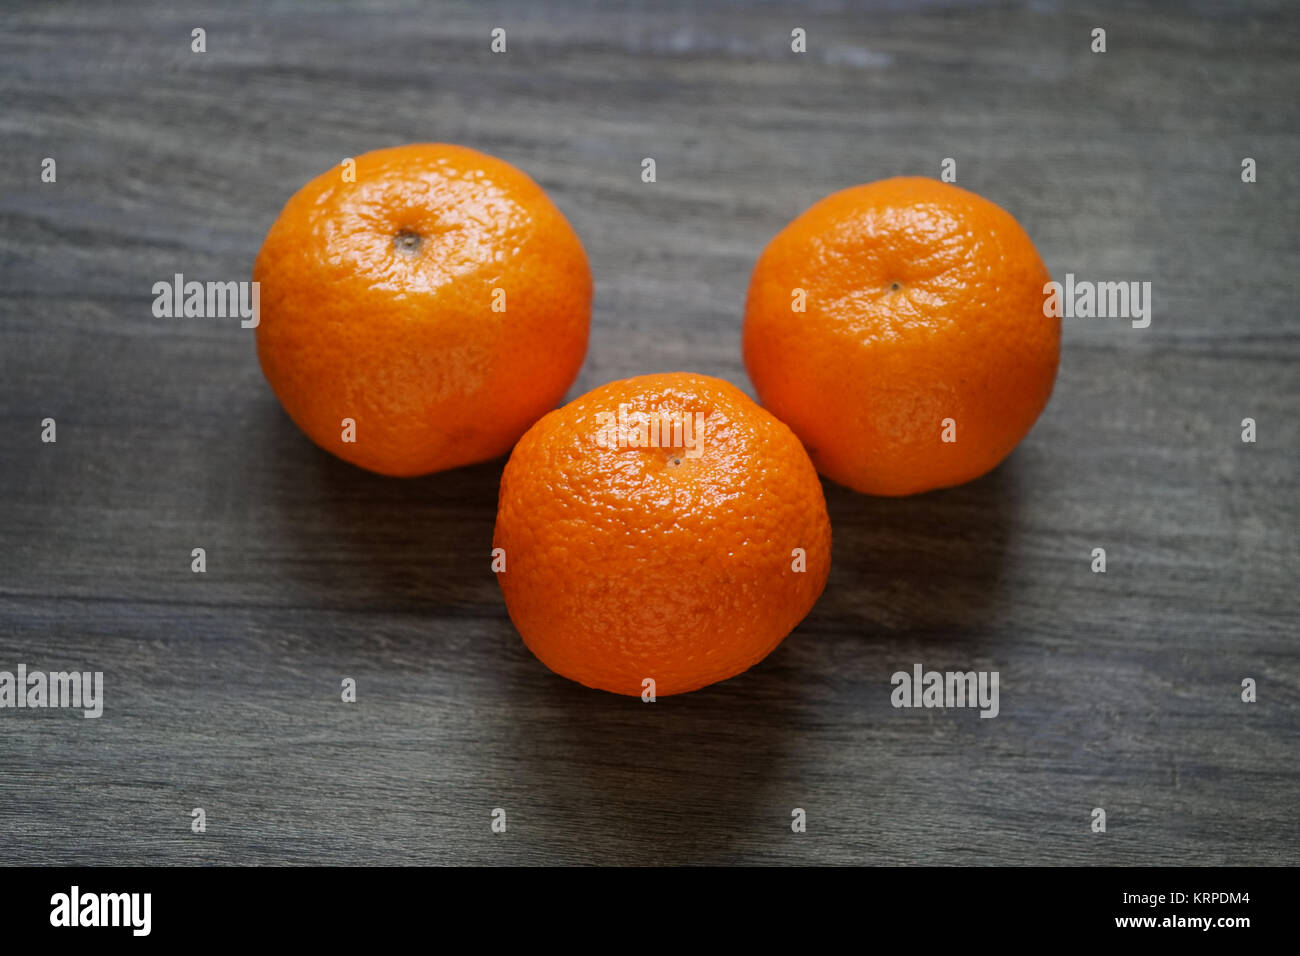 clementines or mandarin oranges on rustic wooden table Stock Photo